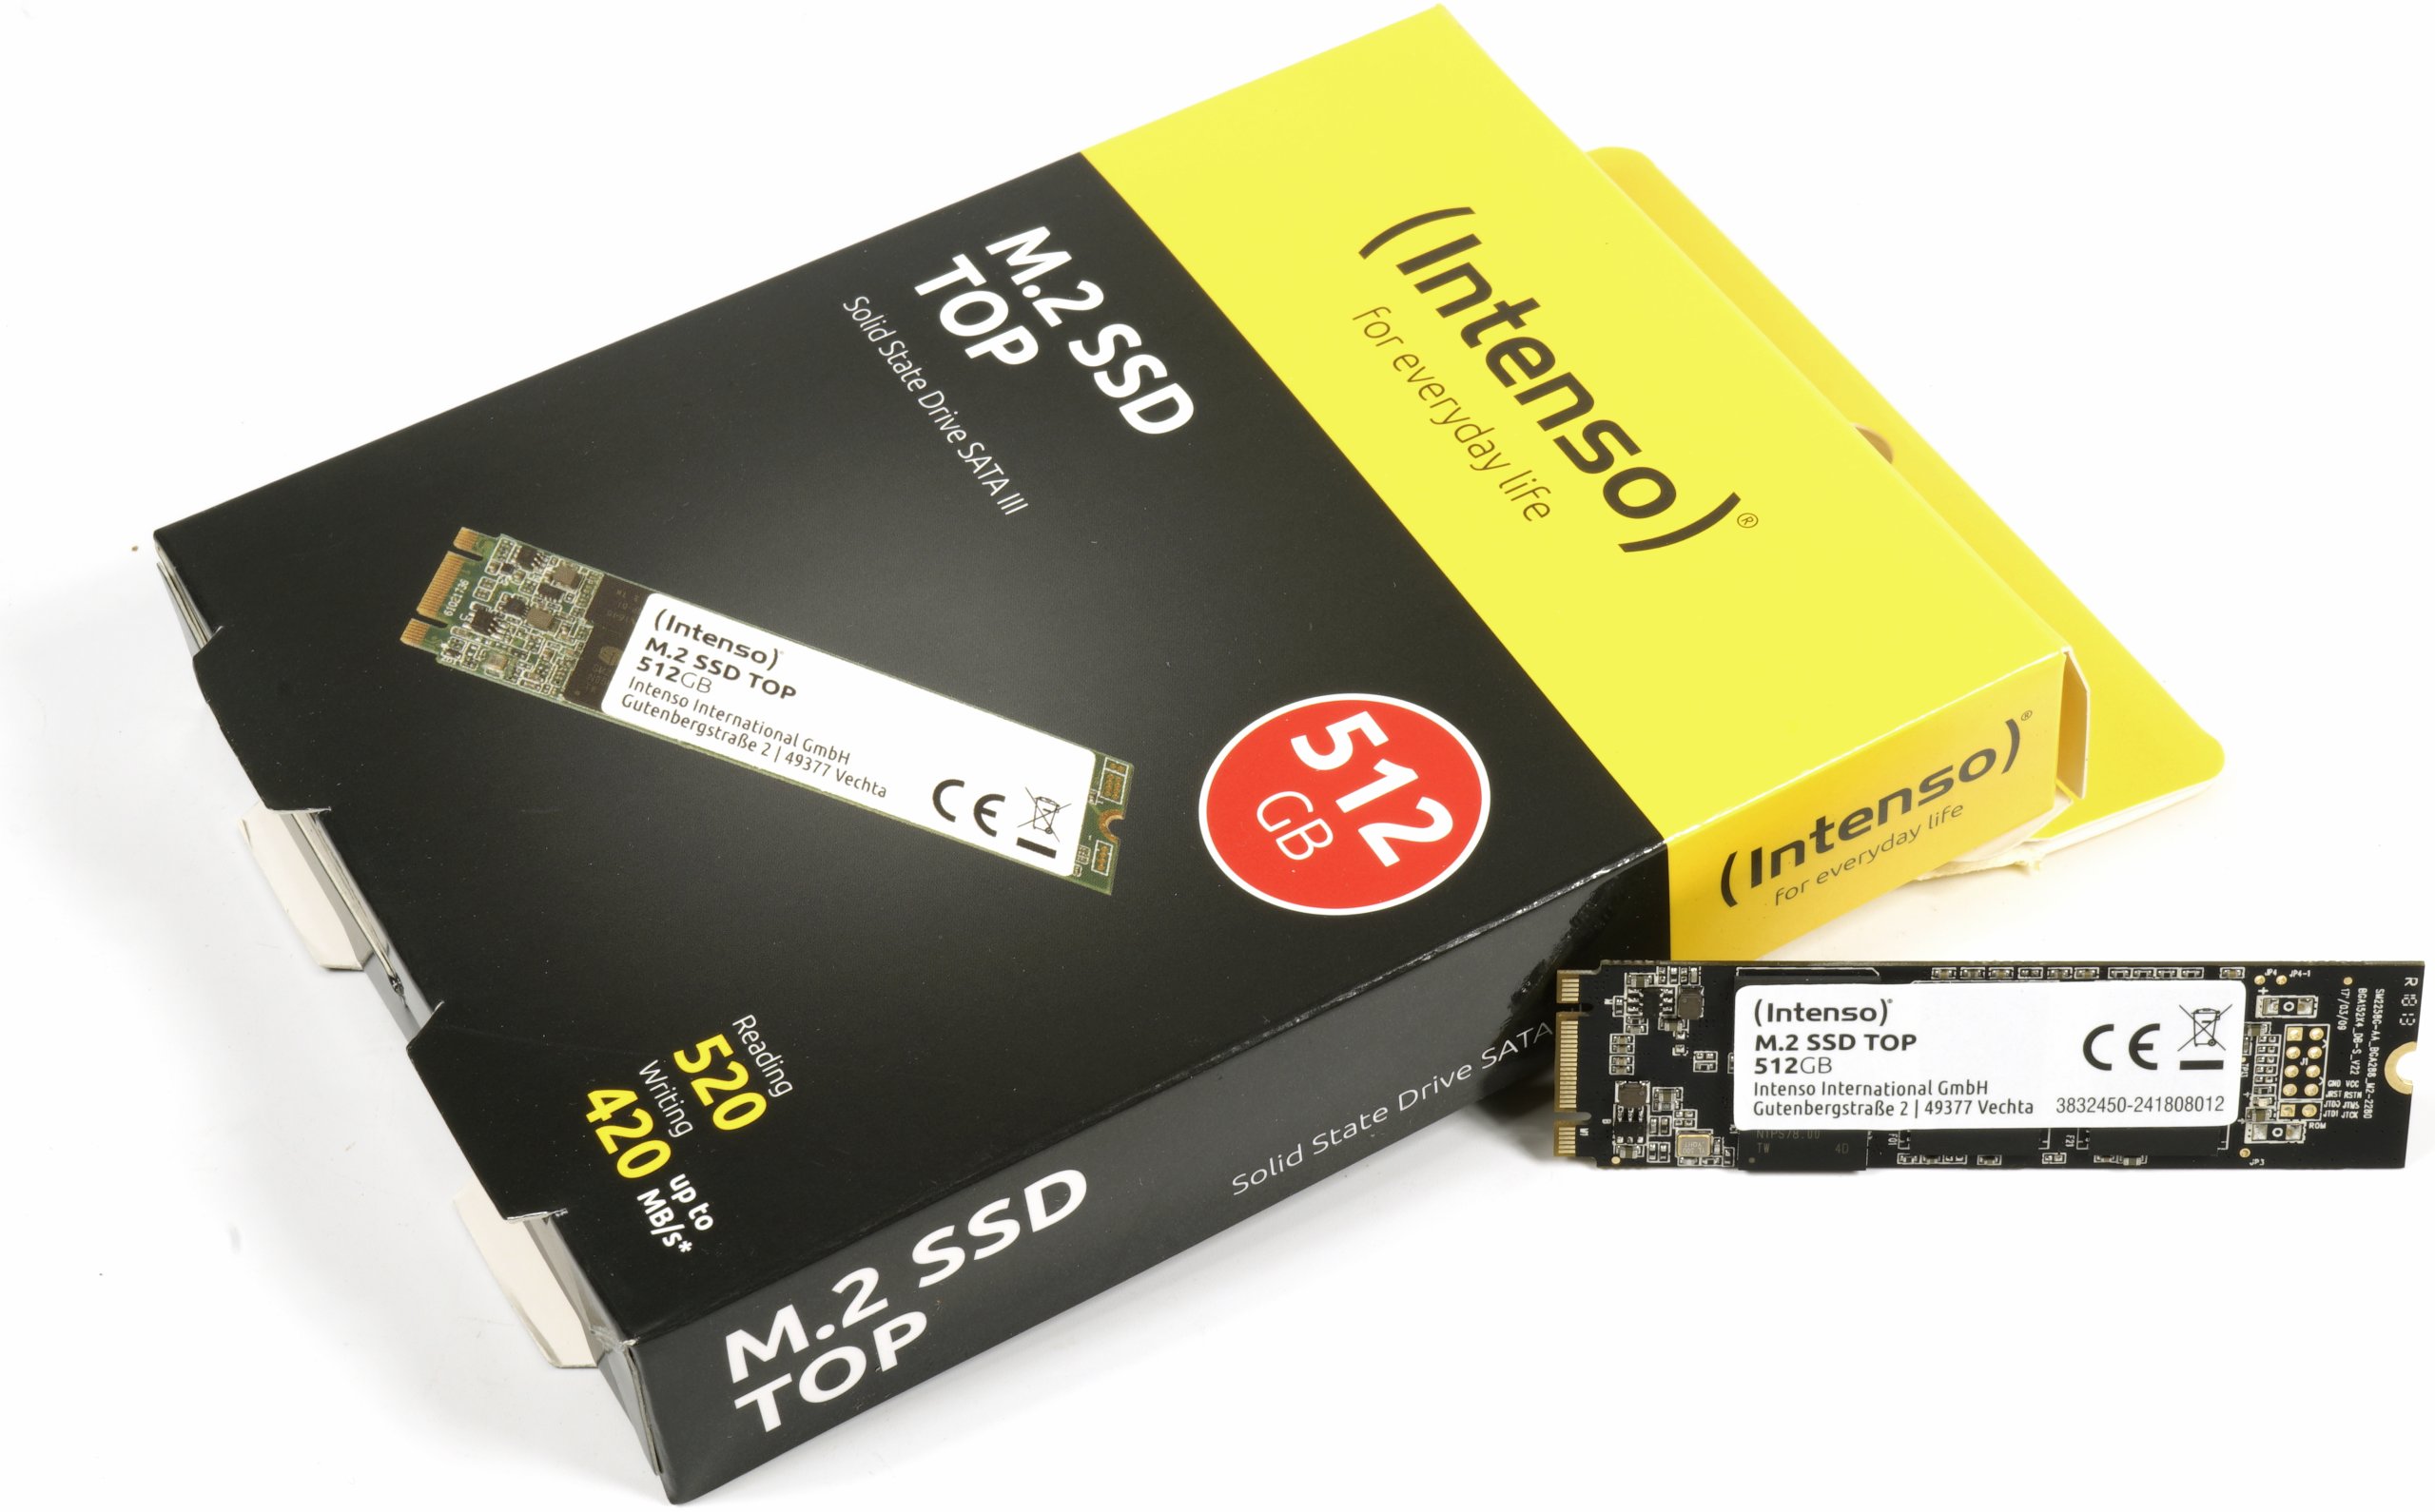 Intenso SSD 512GB 2.5 inches SSD SATA III Top Performance